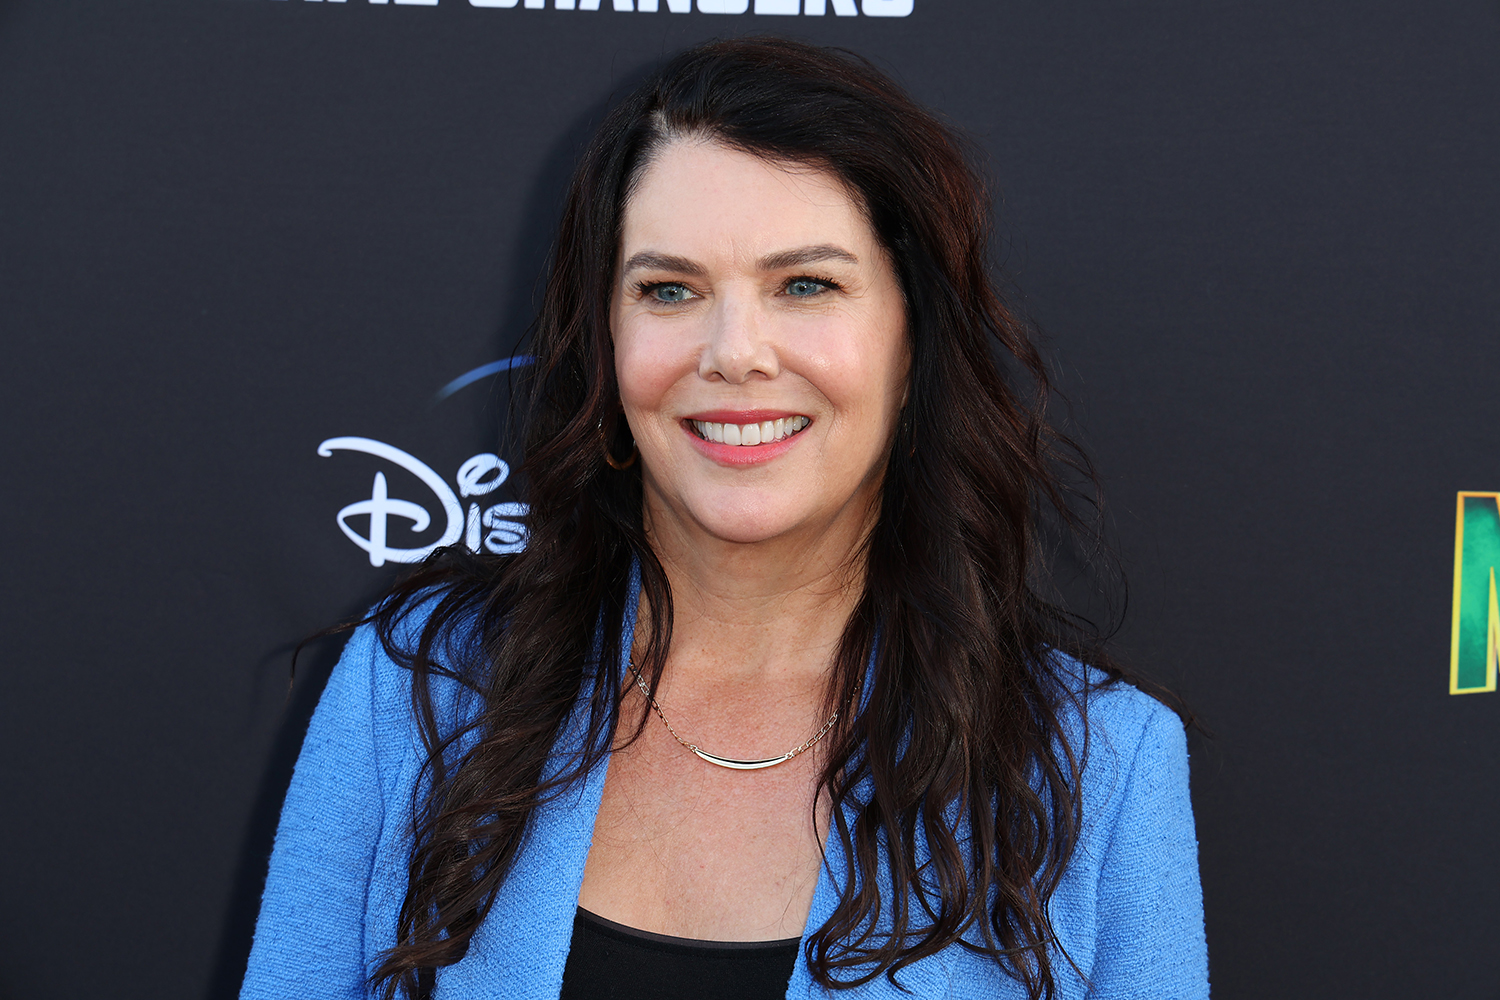 Gilmore Girls star Lauren Graham, who recently shared her theory on Rory's baby, smiles while wearing a black top with a light blue blazer at the The Mighty Ducks Season 2 premiere